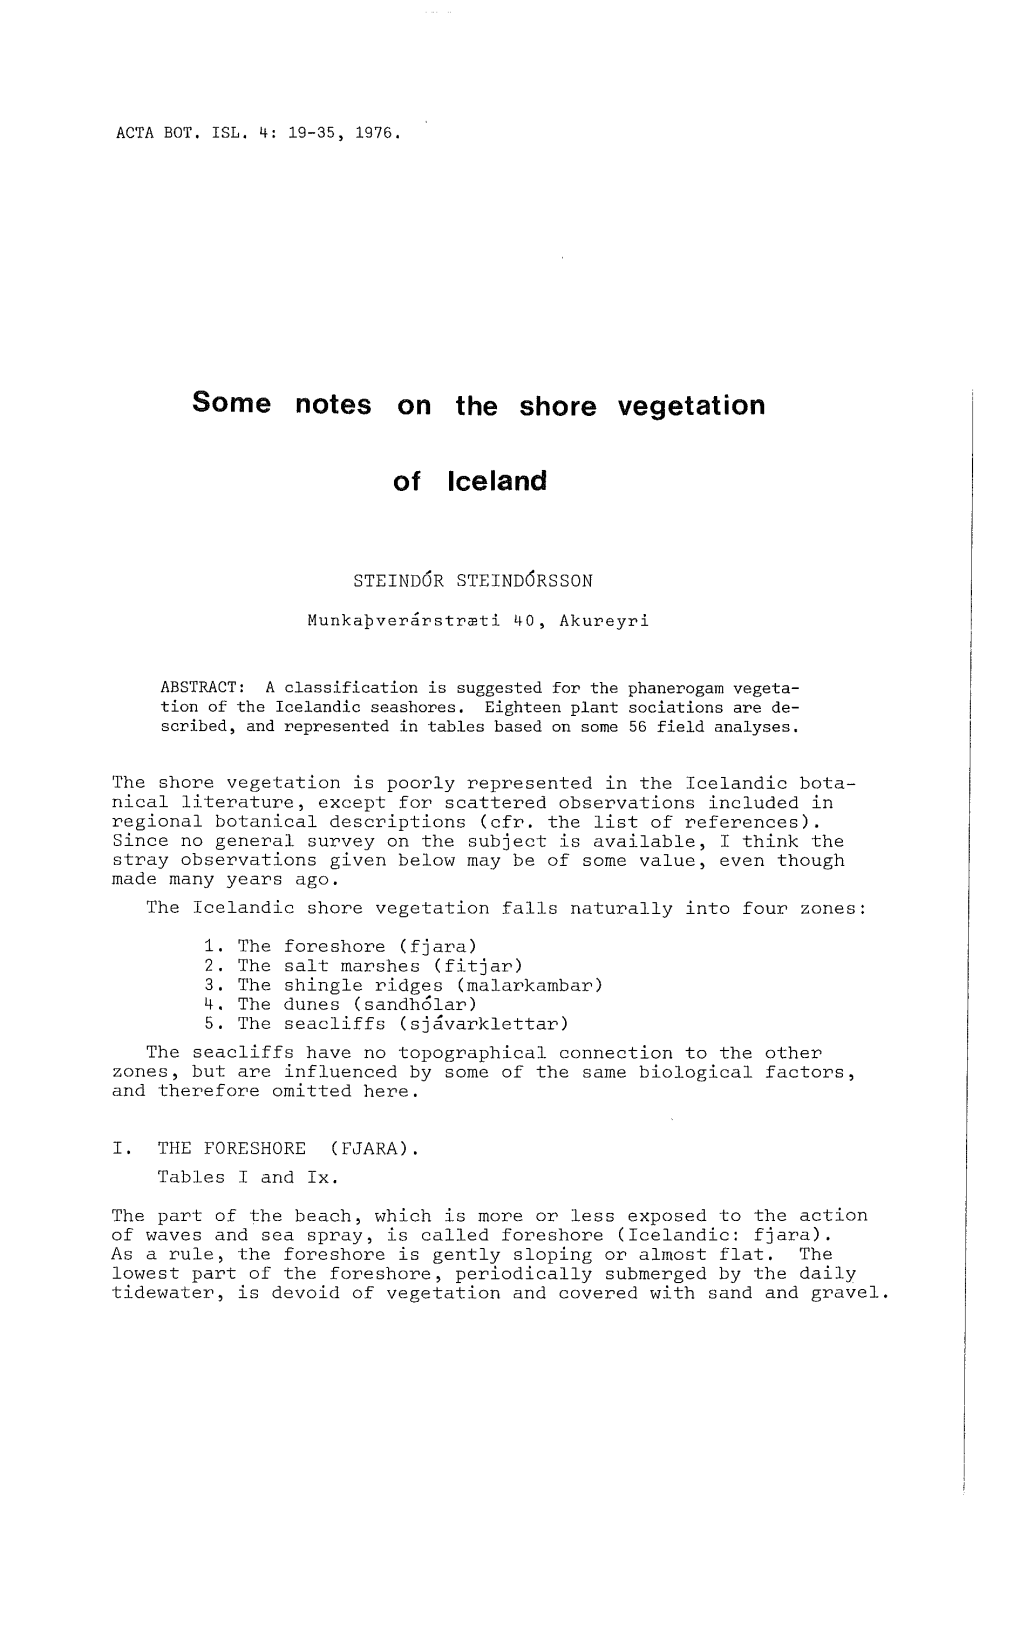 Some Notes on the Shore Vegetation of Iceland